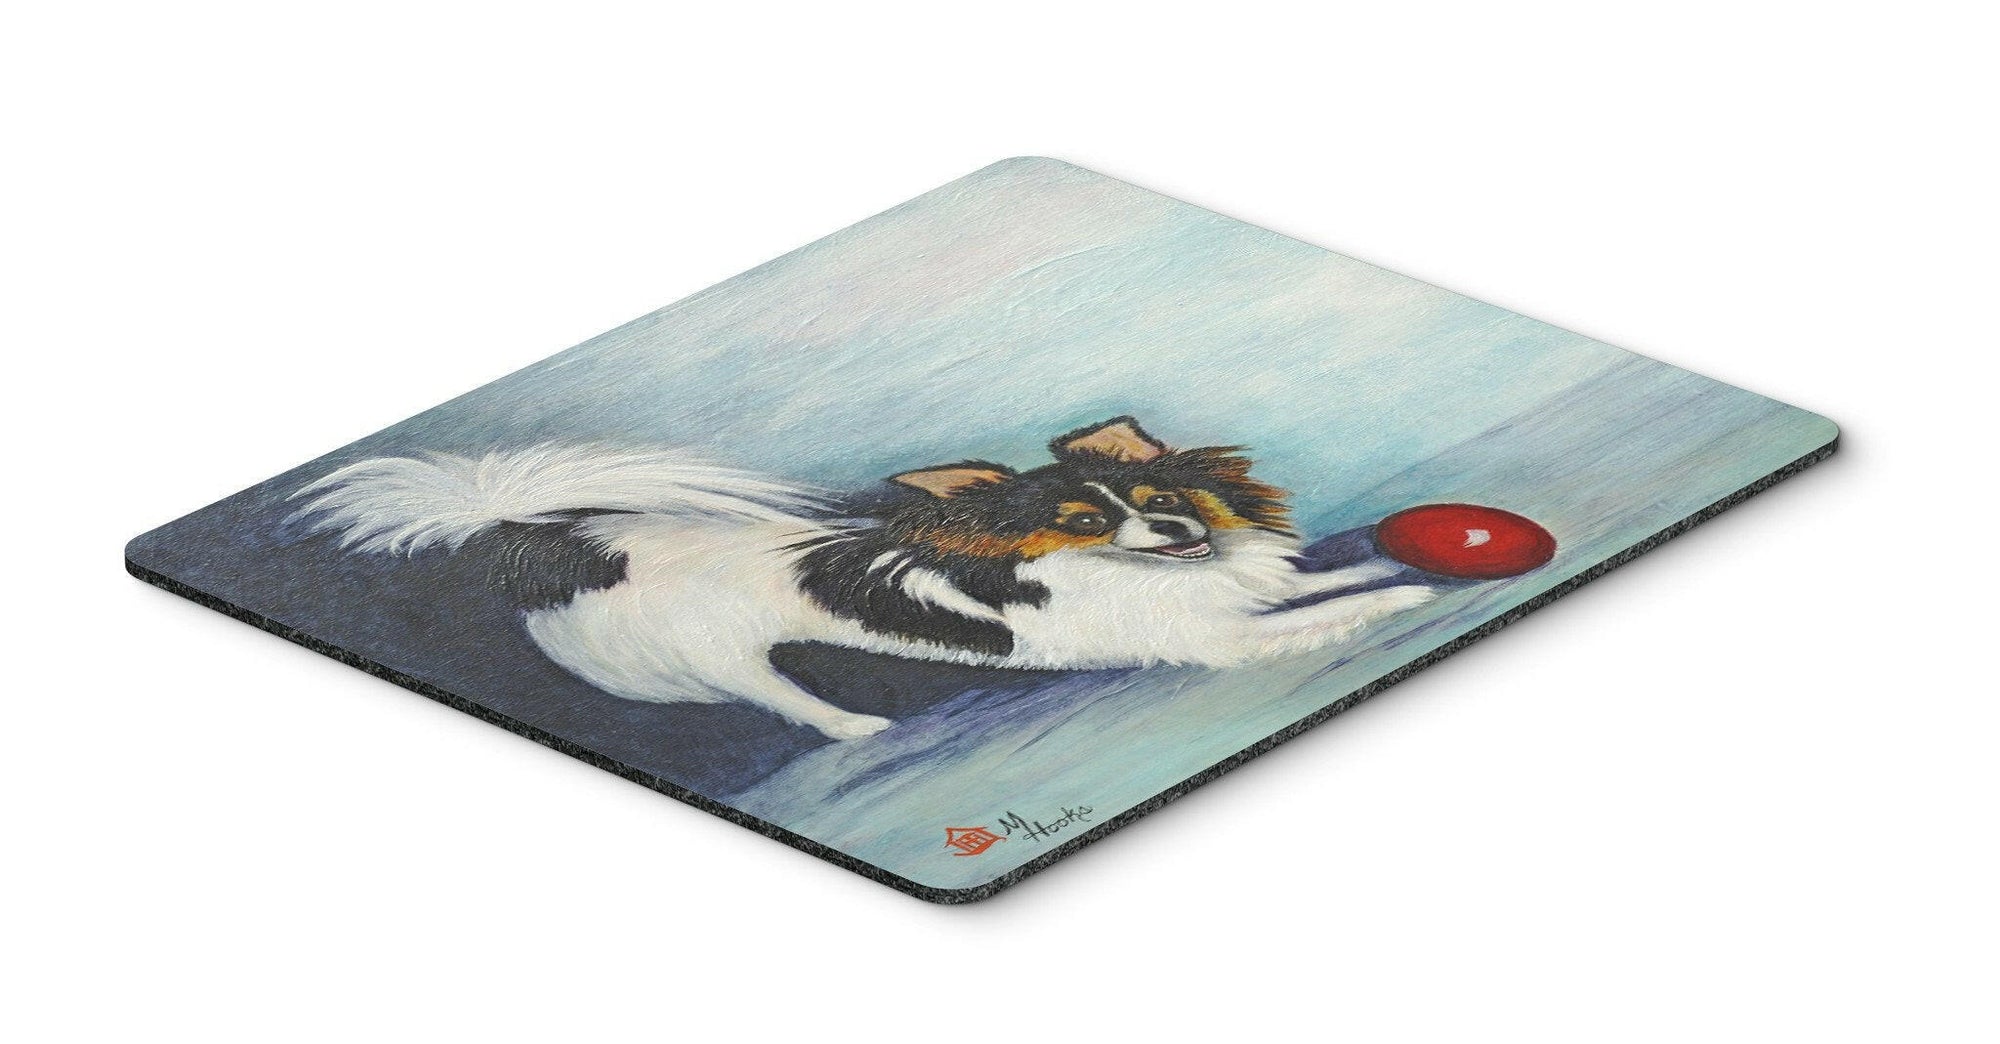 Chihuahua Play Ball Mouse Pad, Hot Pad or Trivet MH1054MP by Caroline's Treasures